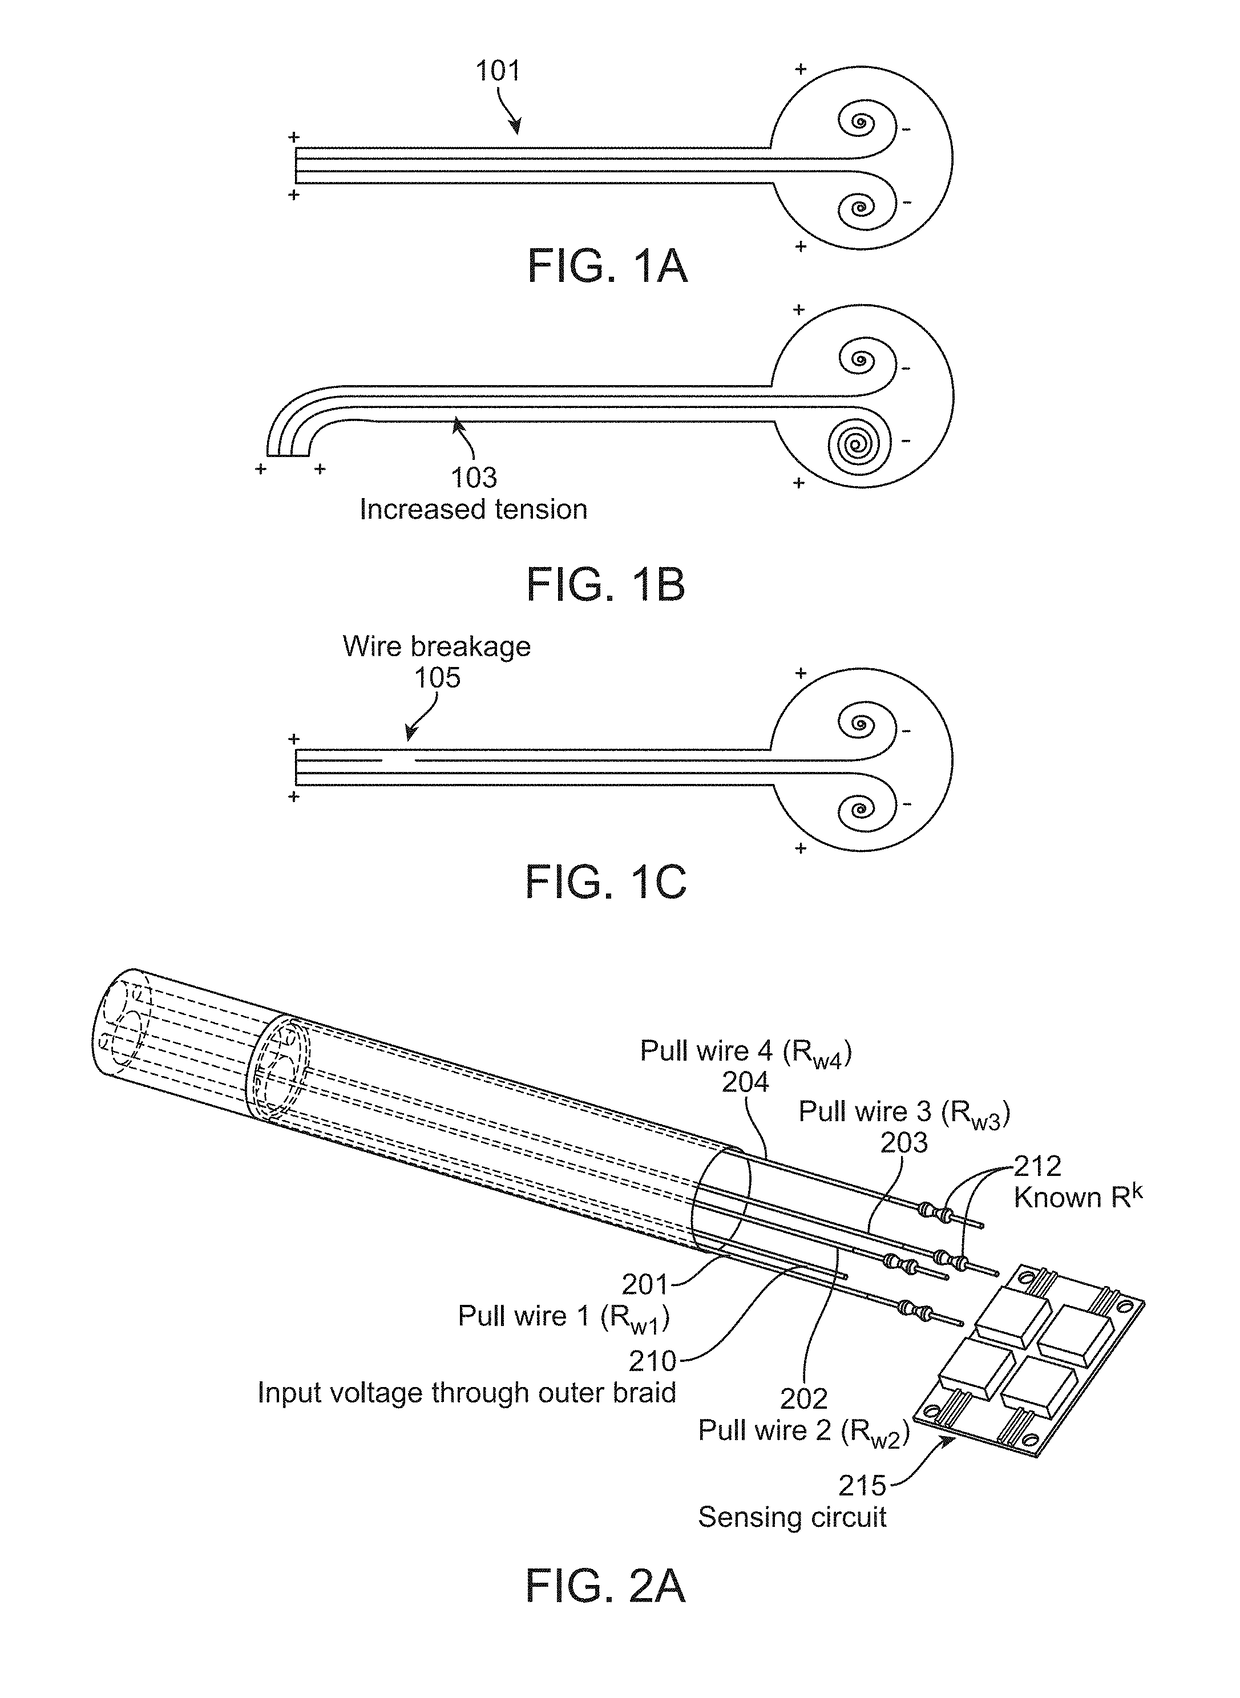 Apparatuses and methods for monitoring tendons of steerable catheters